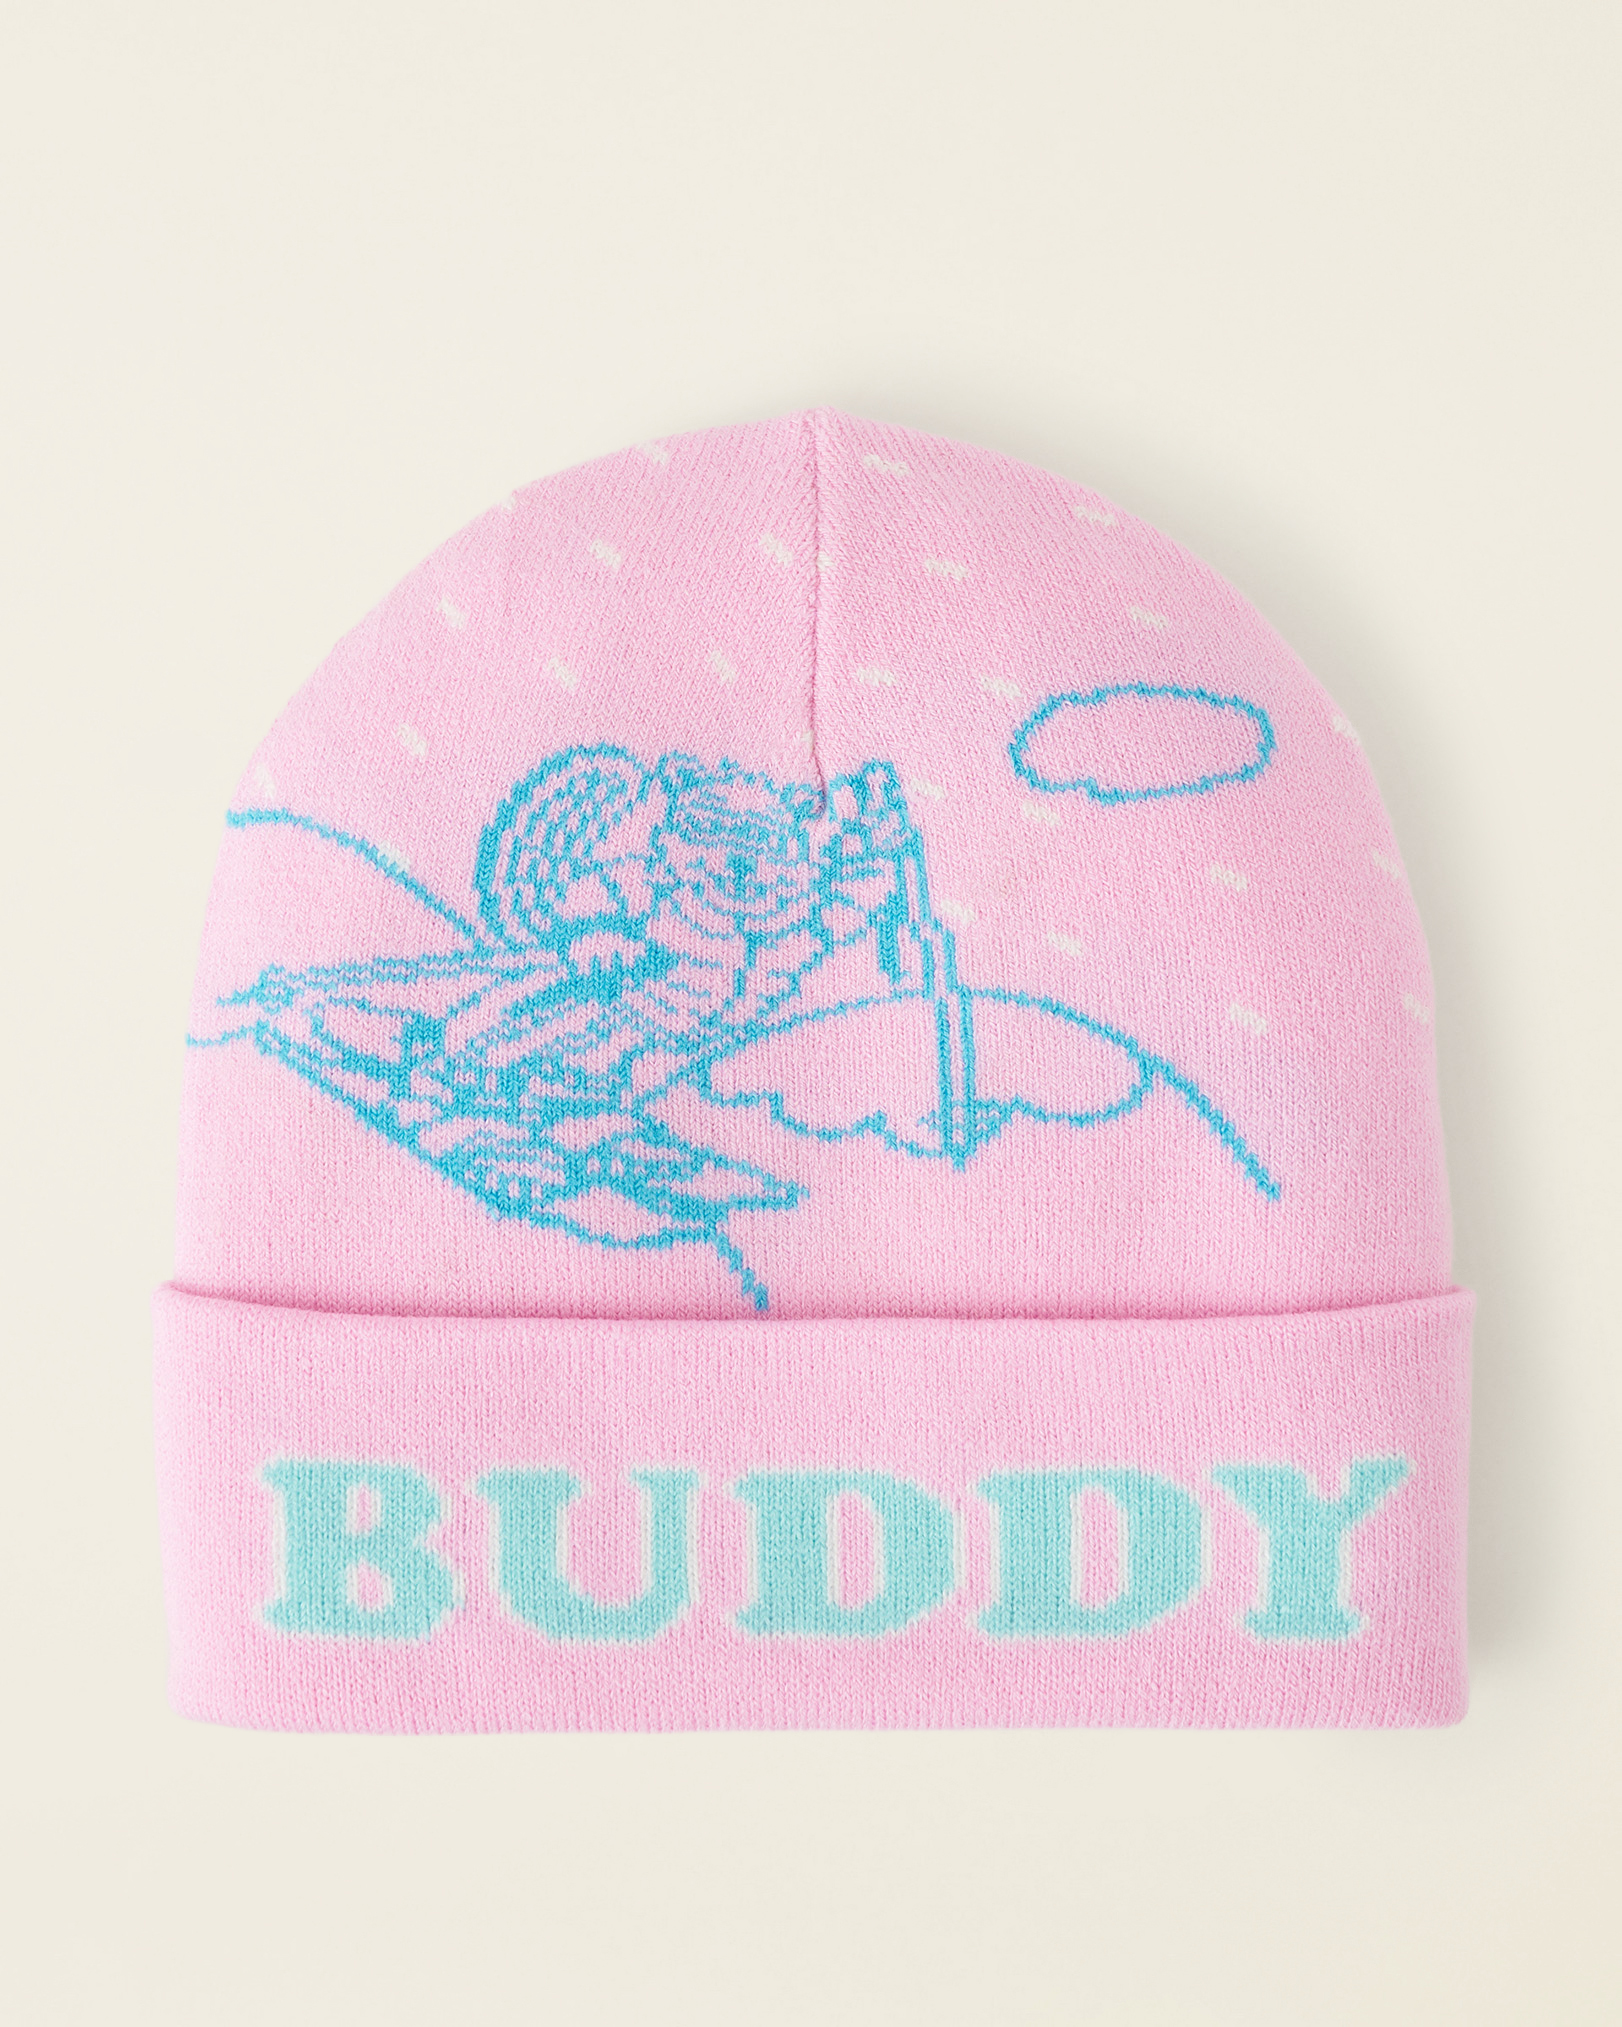 Roots Buddy Toque Hat in Bonbon